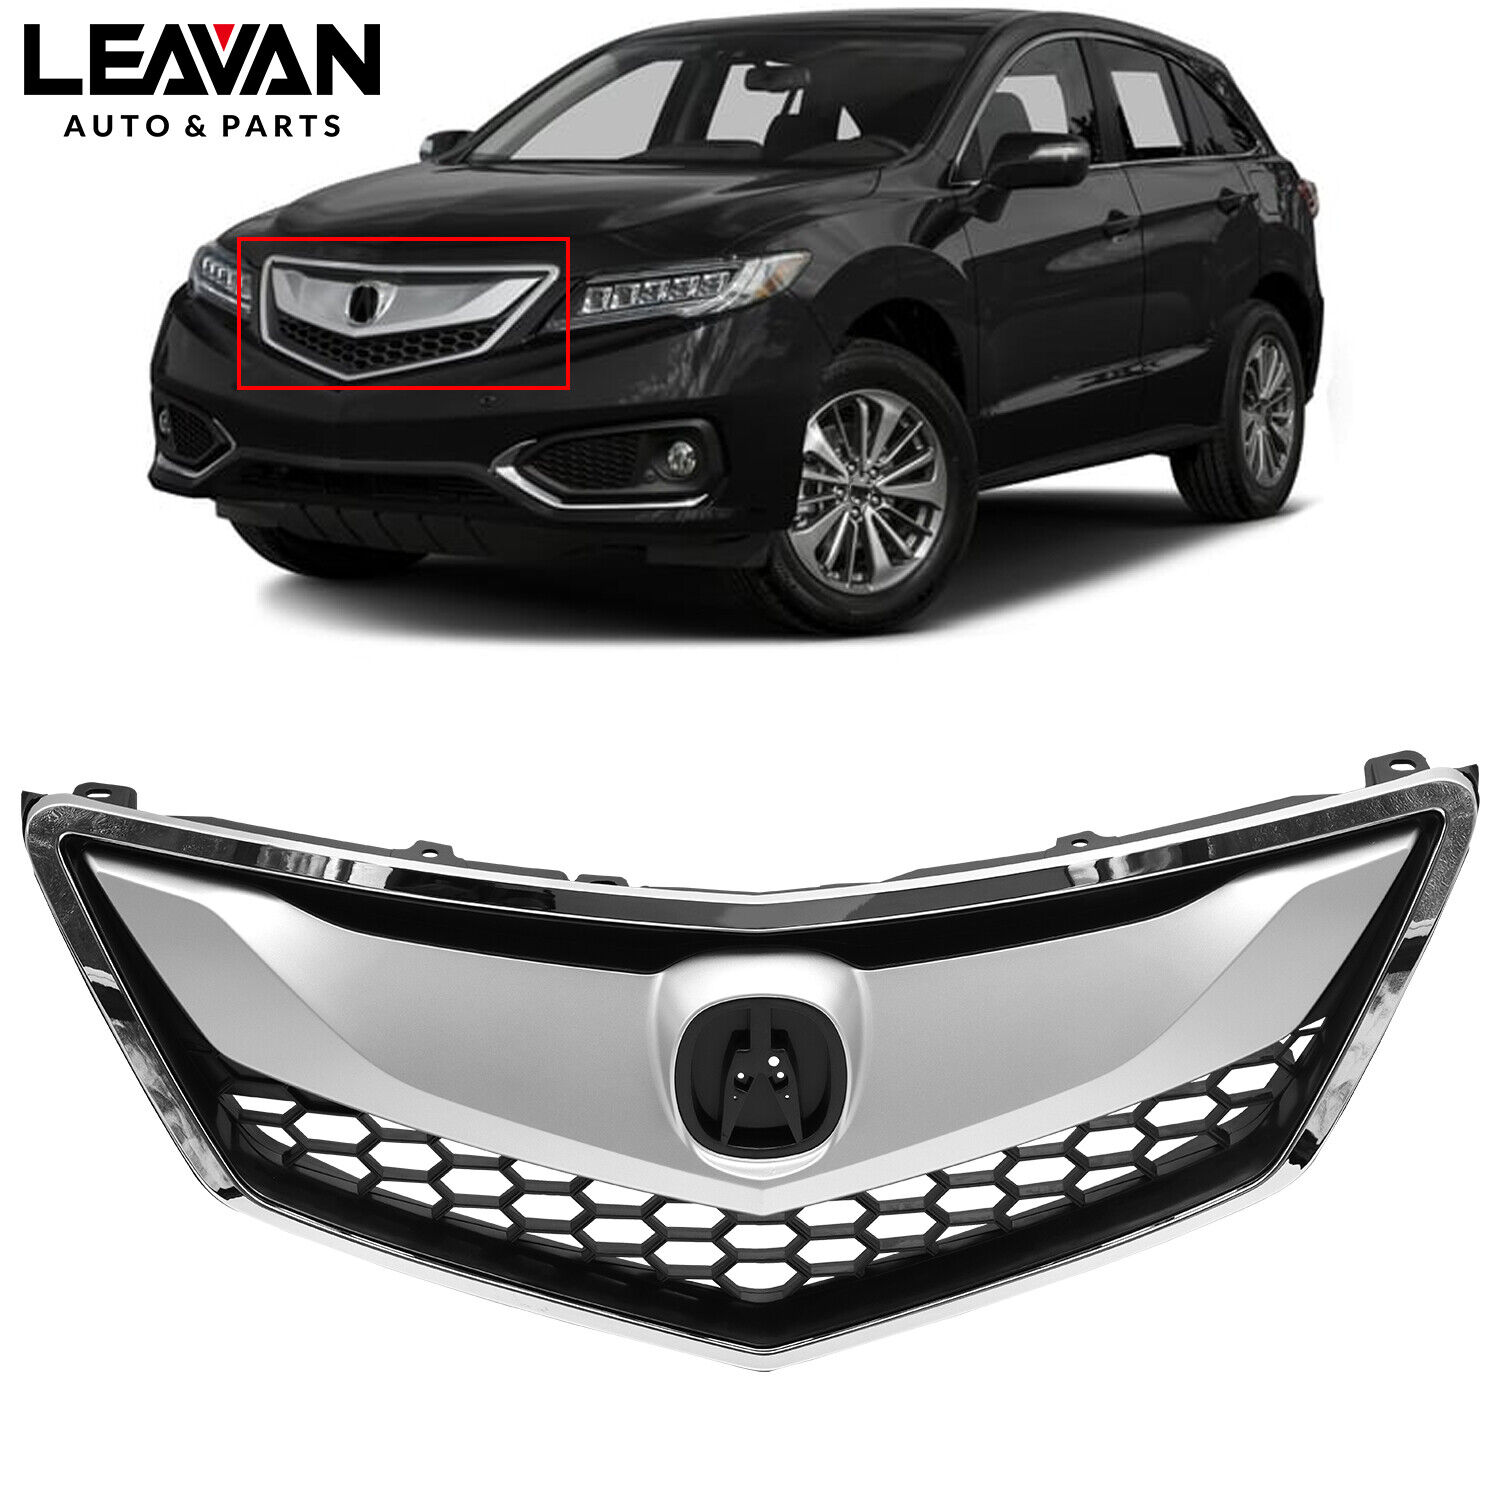 Fits 2016 2017 2018 Acura RDX Honeycomb Chrome Trim Molding Front Grille Grill